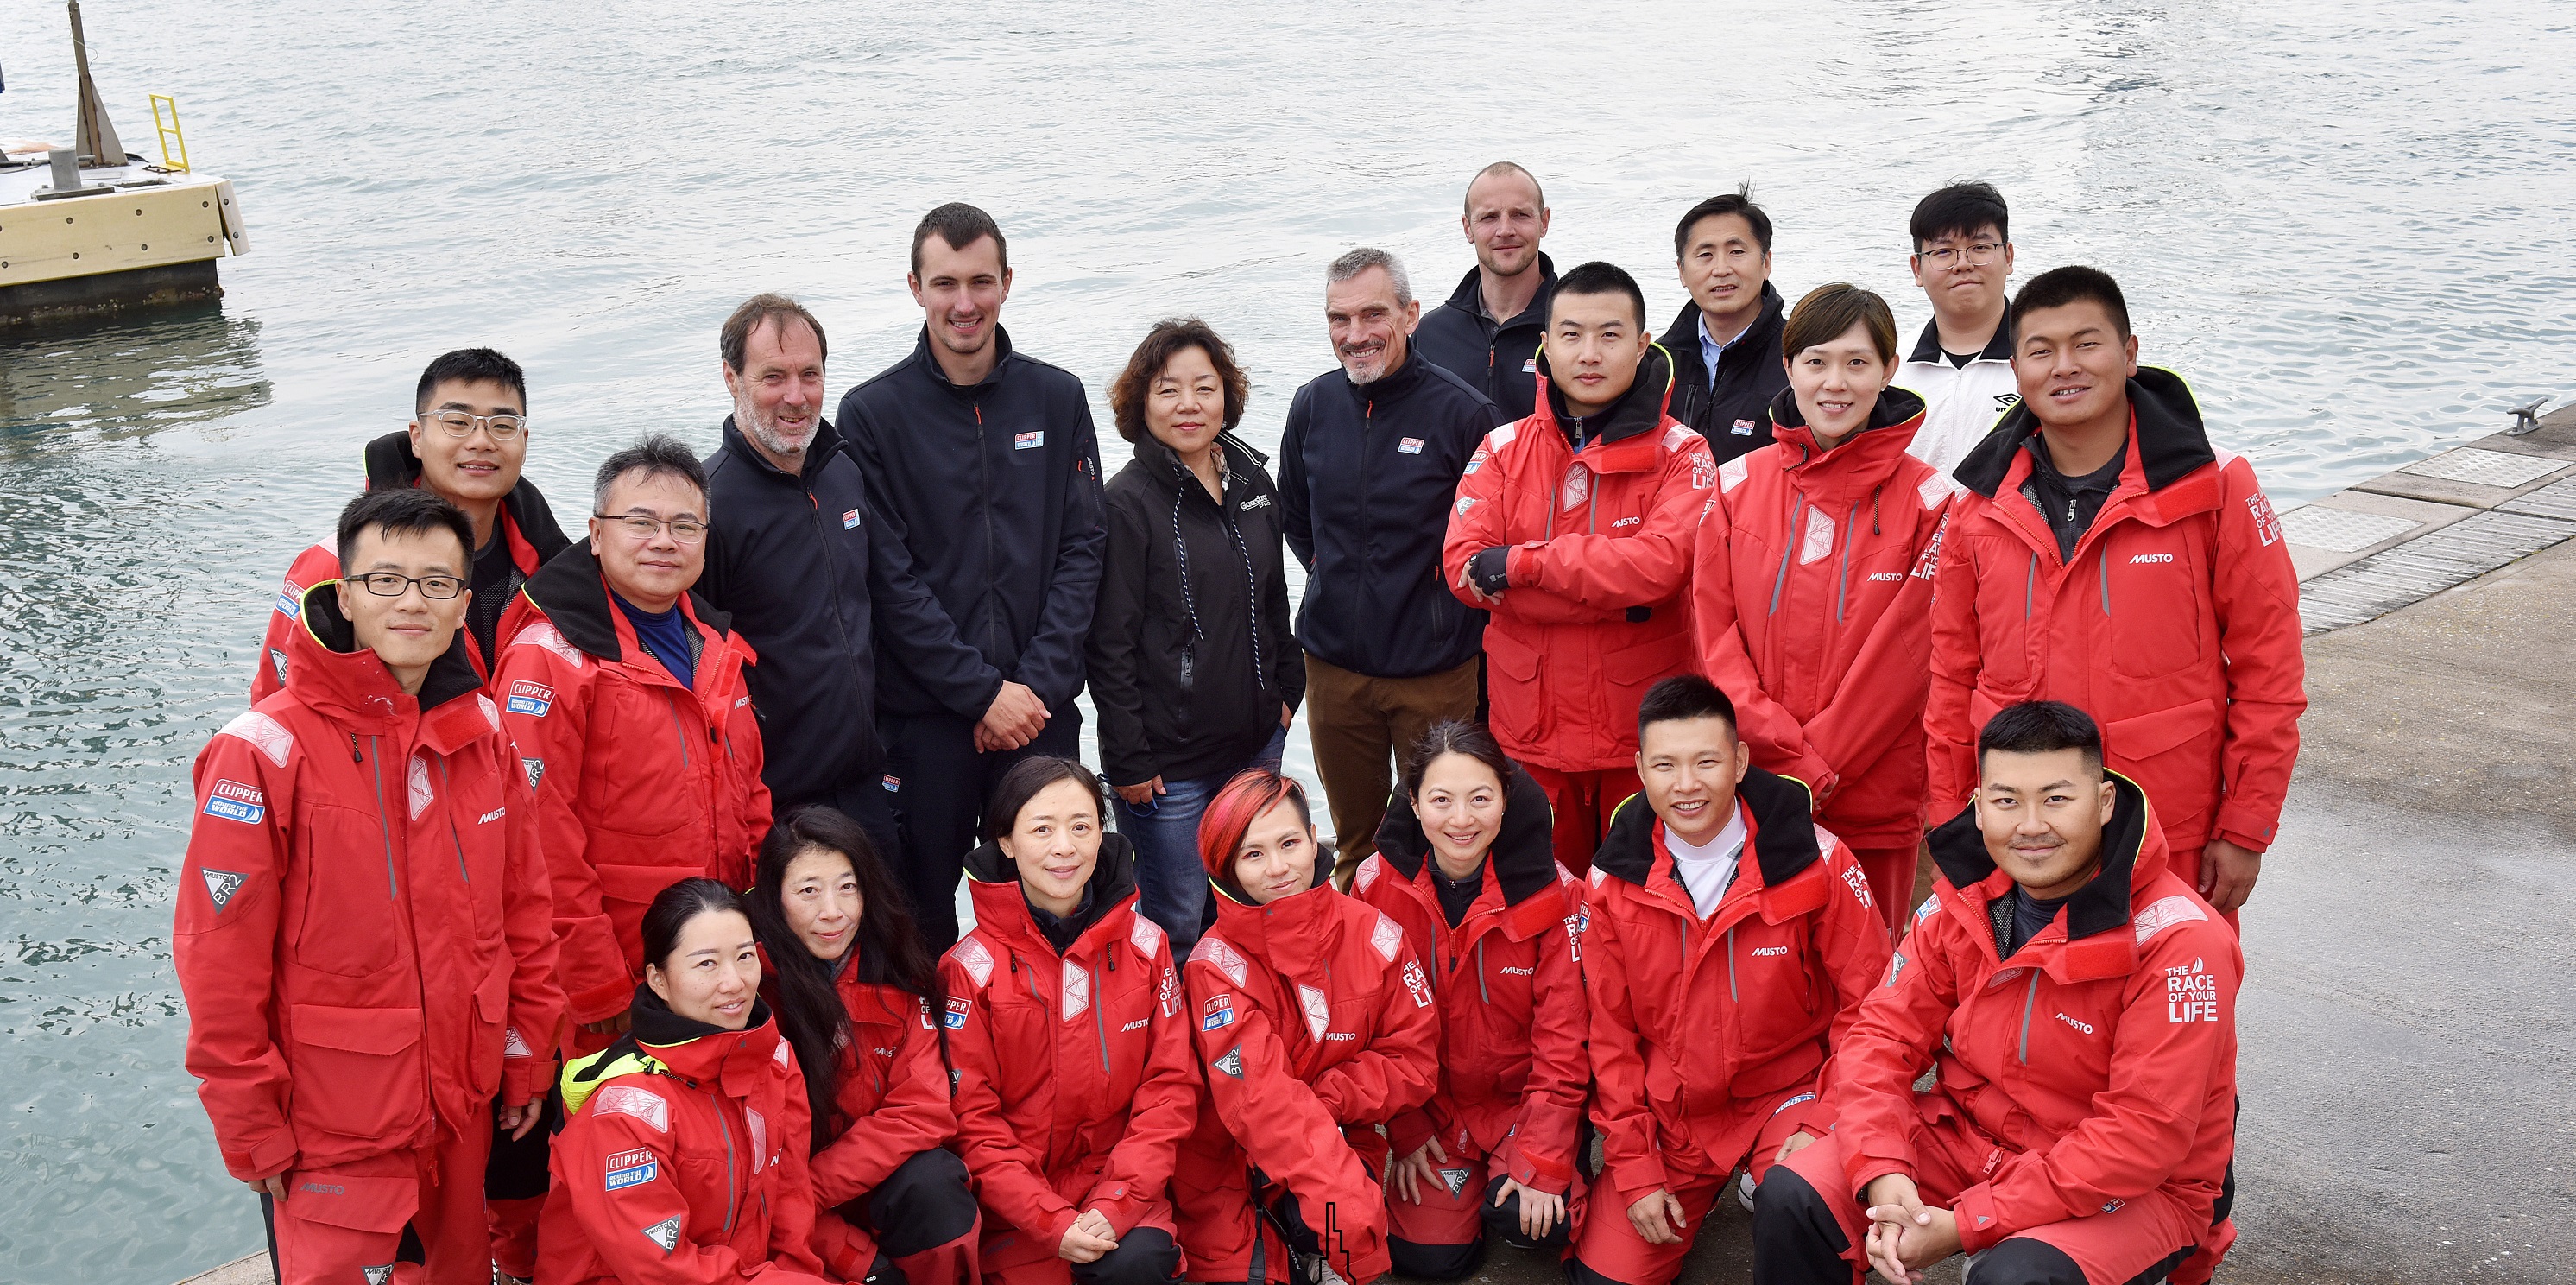 Clipper Ventures CEO William Ward and CYA President Zhang Xiaodong with Clipper Race Skippers and crew in Gosport, UK